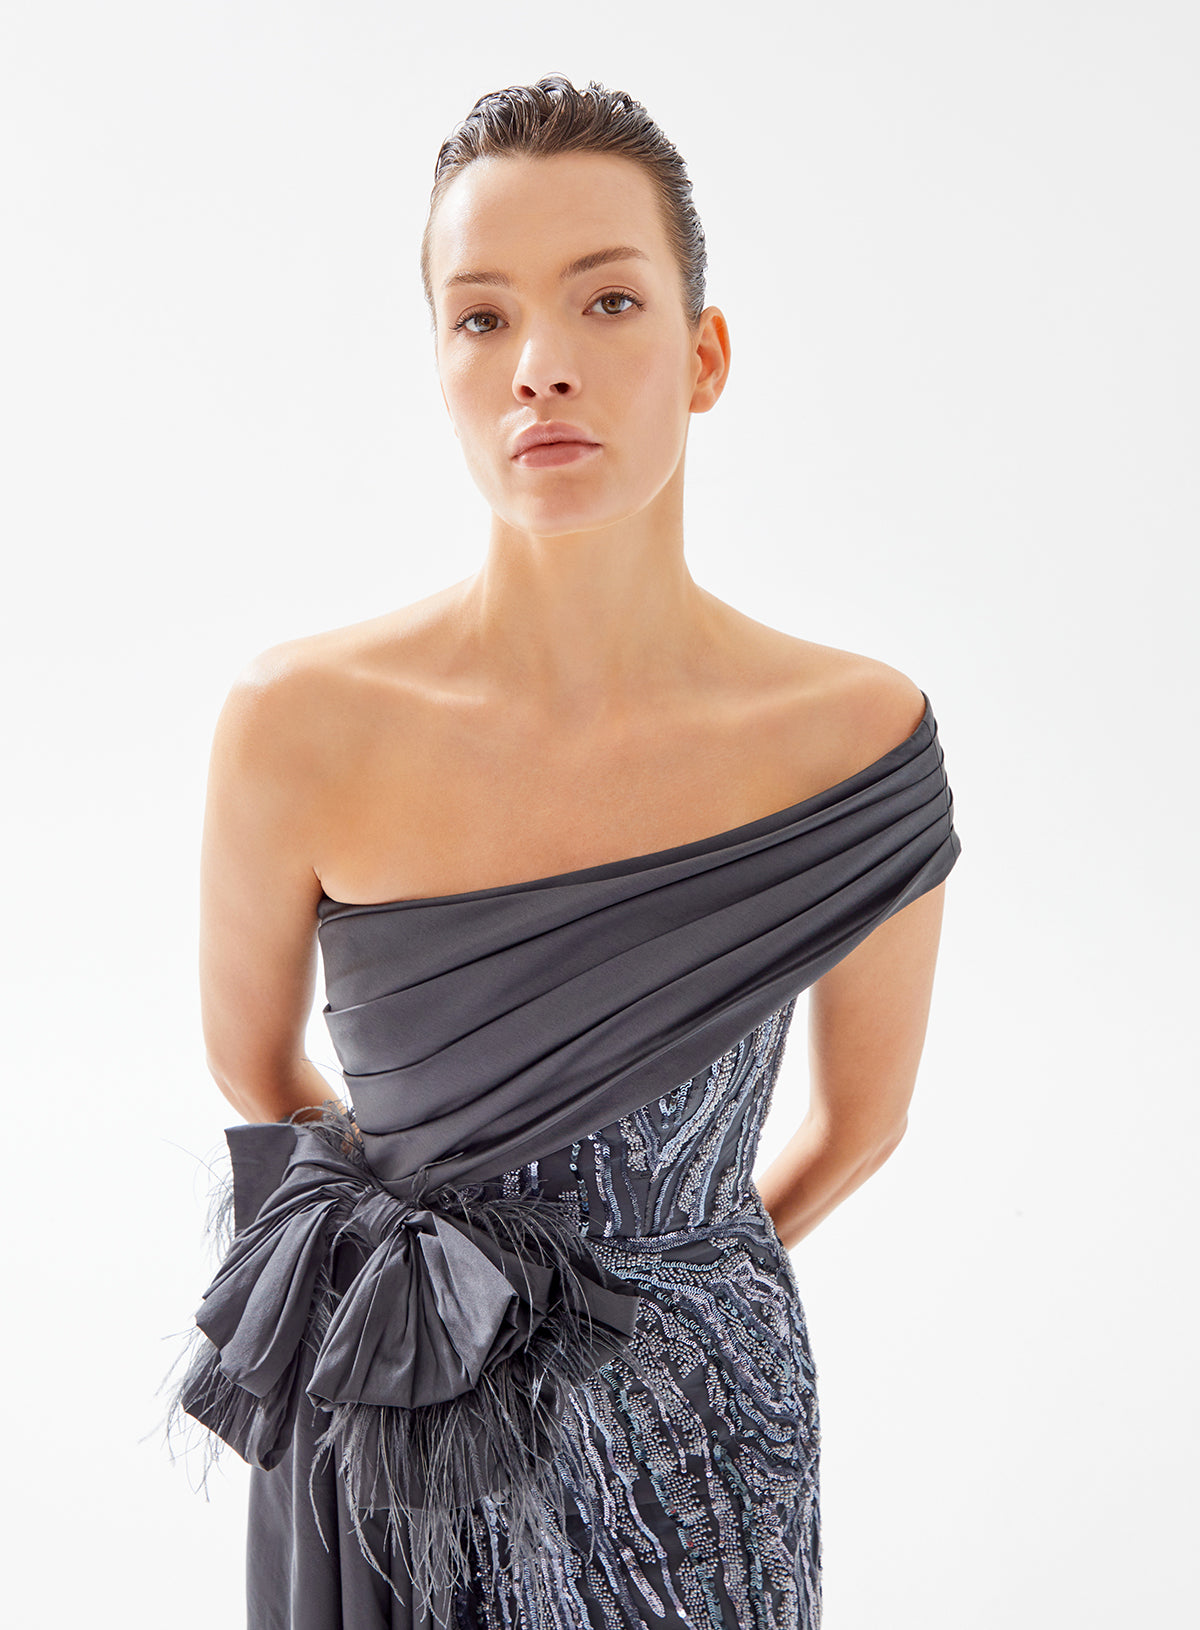 Tarik Ediz 98255 MILLIE Anthracite Off-Shoulder Contrast Dress - A stunning anthracite contrast dress with off-shoulder design, exquisite embroidery, and a charming bow for a sophisticated and captivating look.